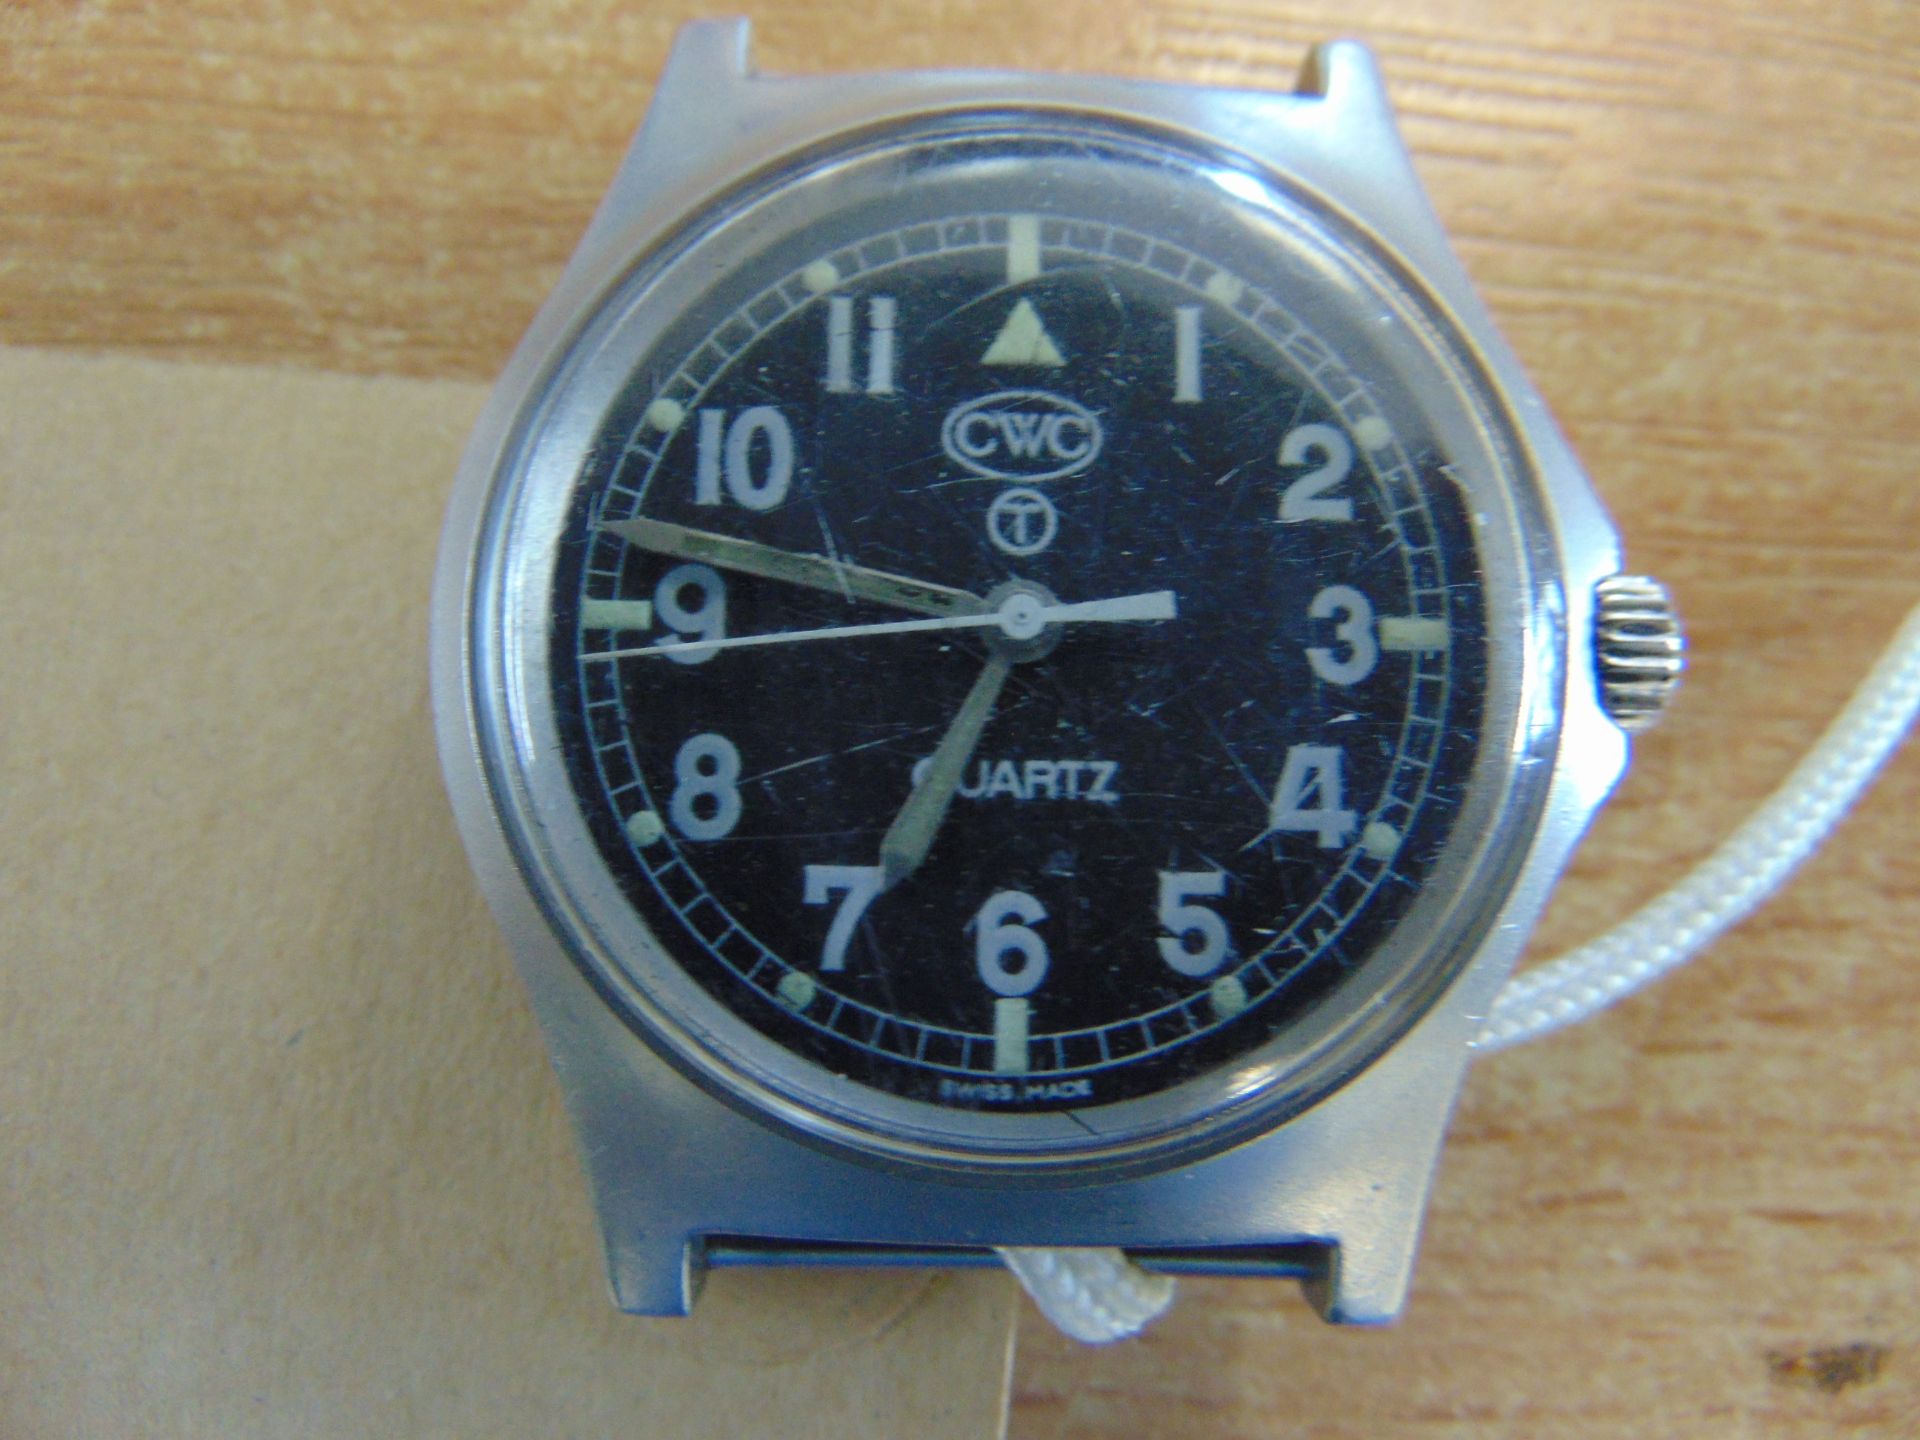 Rare CWC 0552 Royal Marines Issue Service Watch Nato Markings, Date 1989